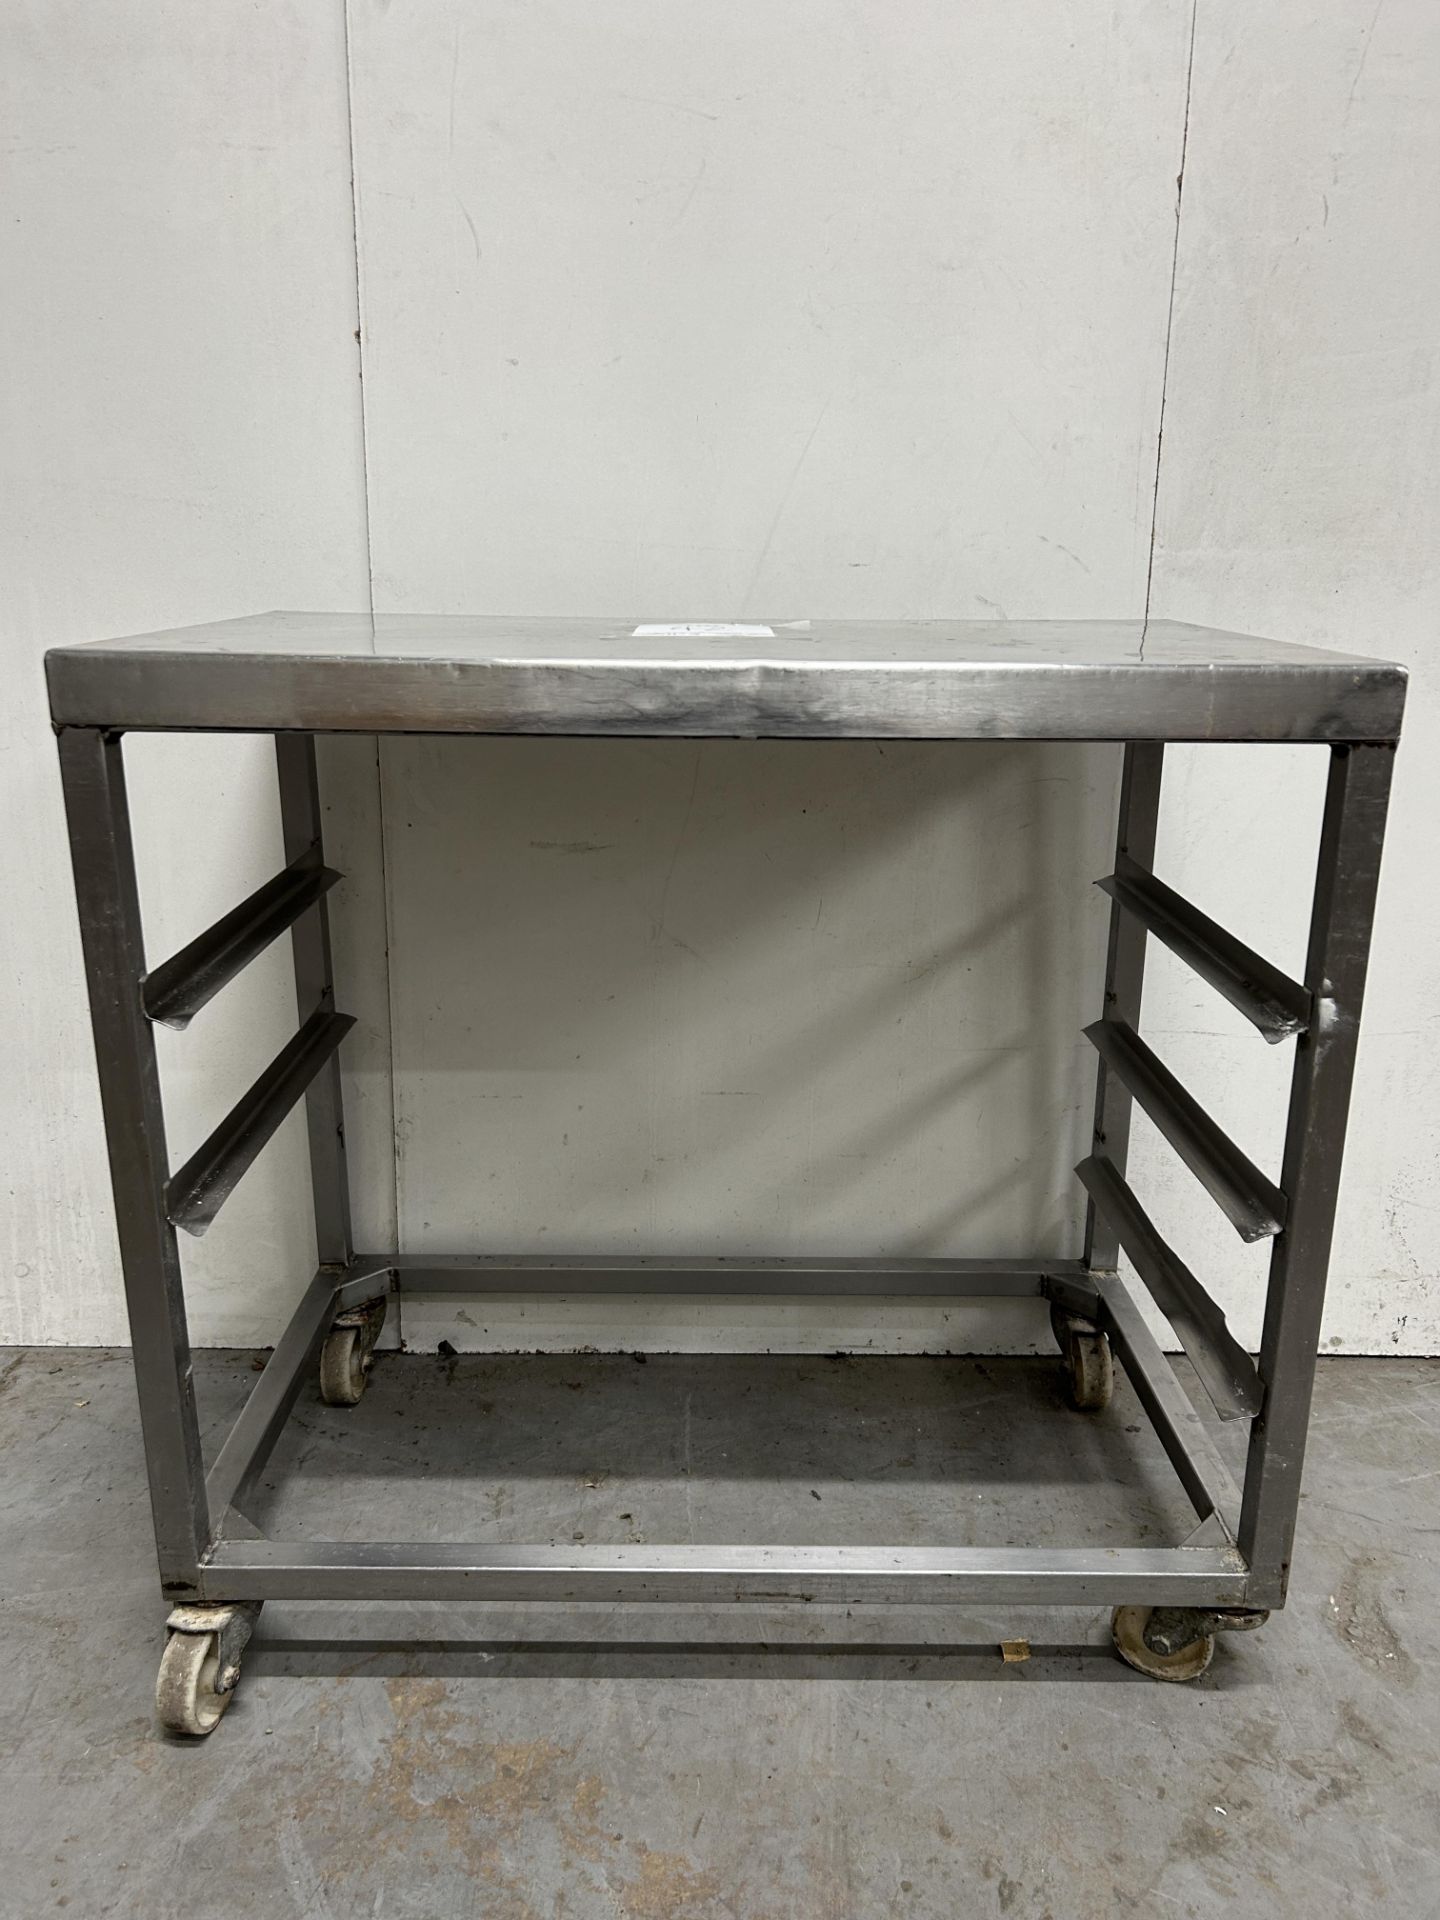 Stainless Steel Steel Mobile Preparation Table w/ Tray Shelves | 85cm x 50cm x 80cm | LOCATED IN WHI - Image 2 of 2